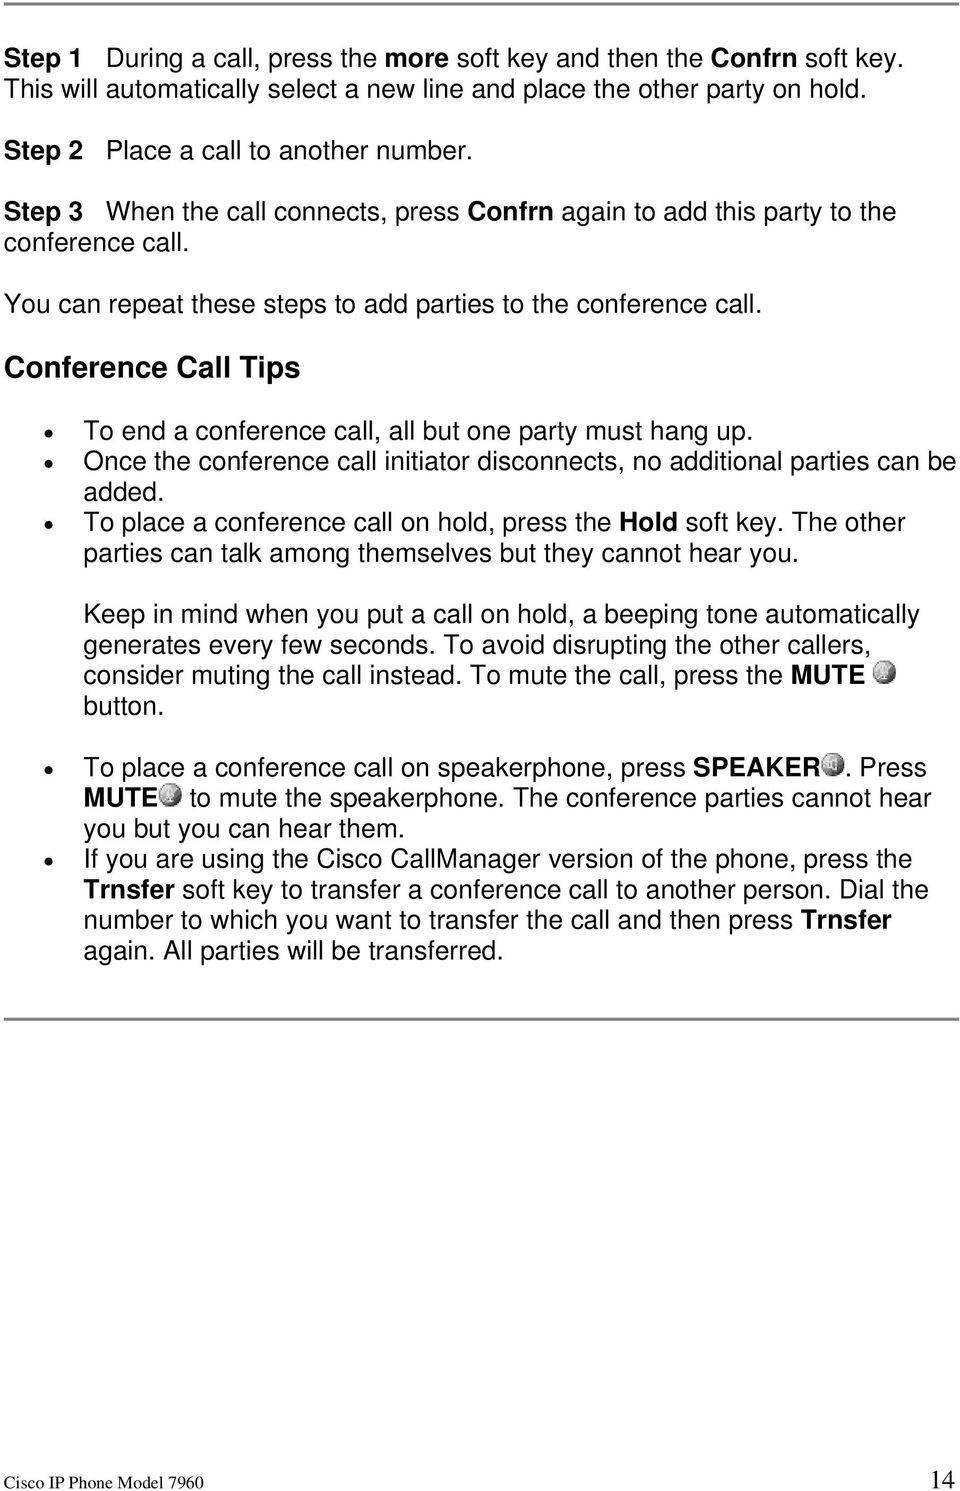 Conference Call Tips To end a conference call, all but one party must hang up. Once the conference call initiator disconnects, no additional parties can be added.